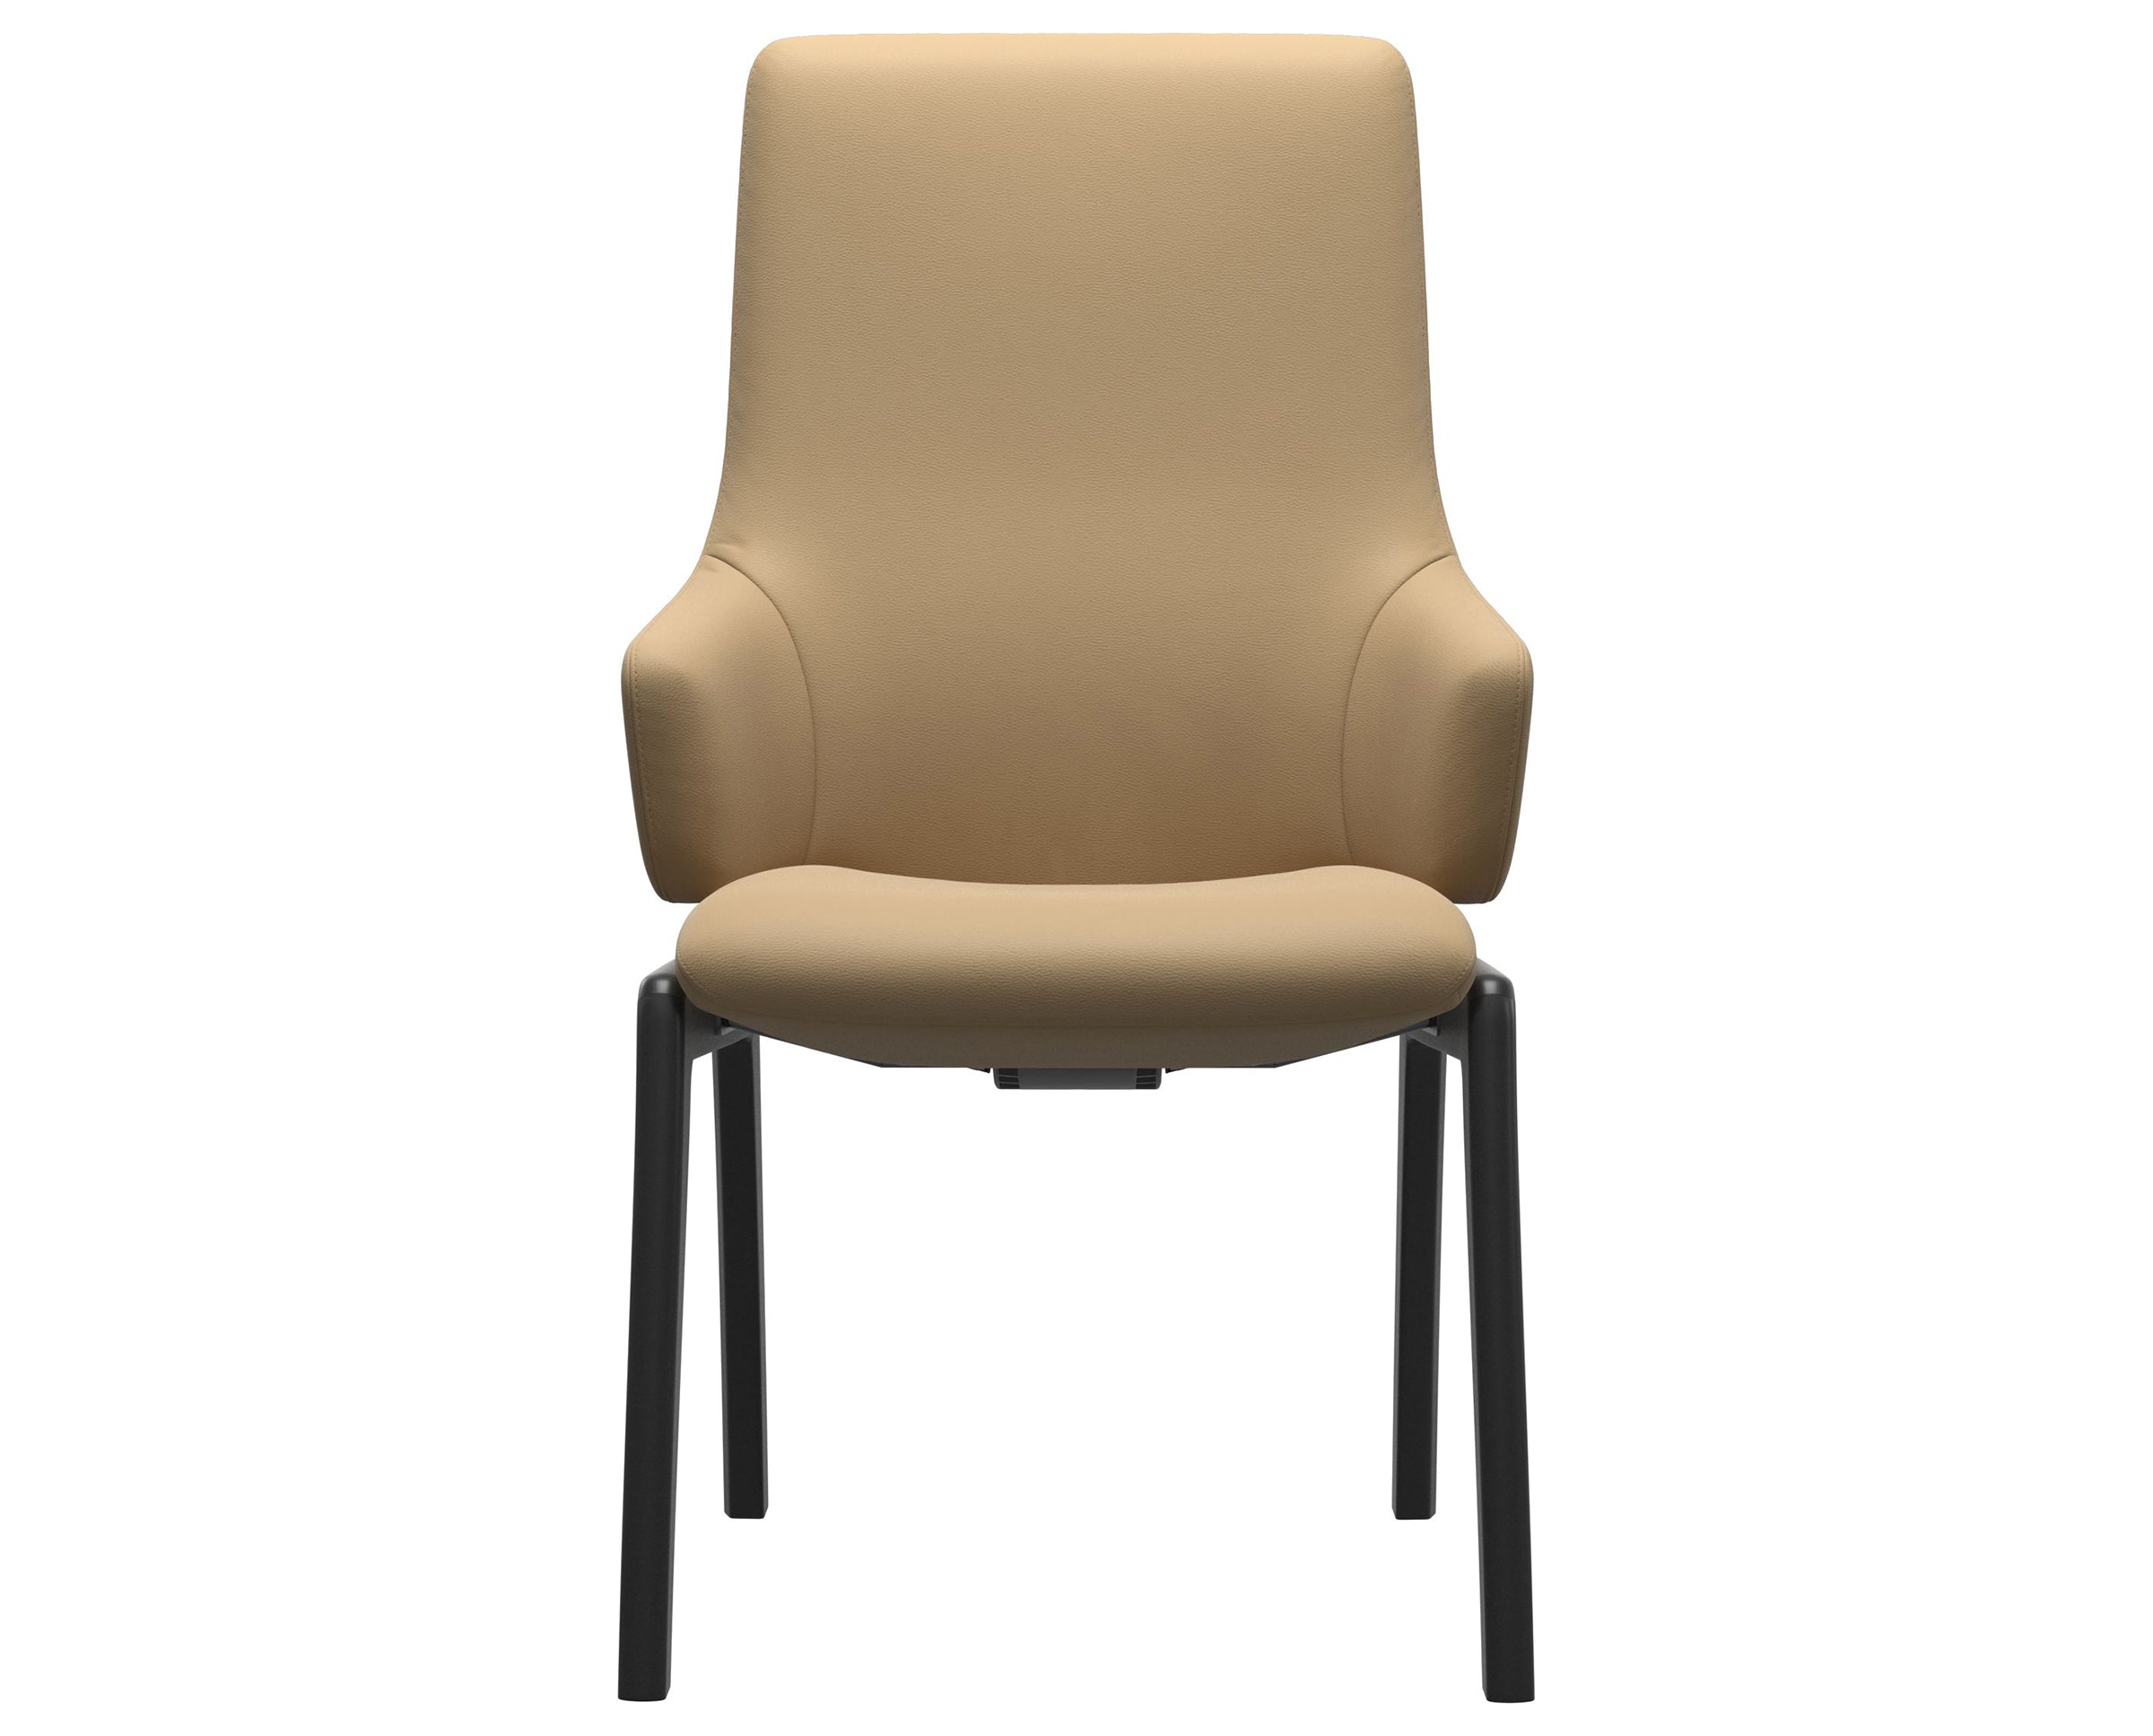 Paloma Leather Sand and Black Base | Stressless Laurel High Back D100 Dining Chair w/Arms | Valley Ridge Furniture